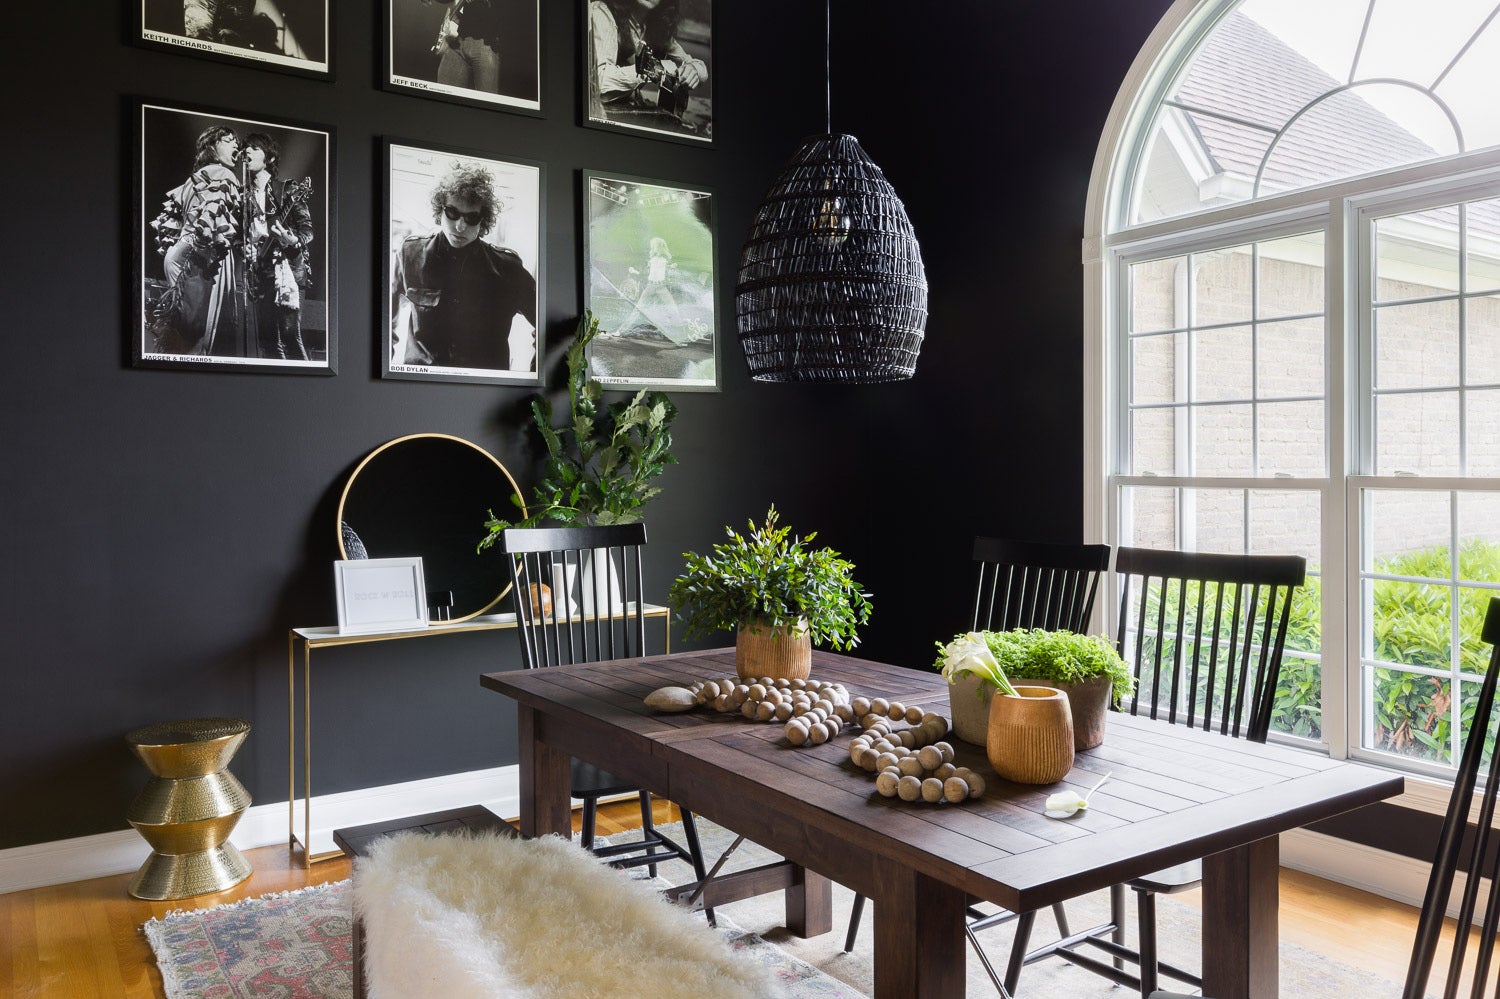 Ready for the new neutral in home decor? It's black.